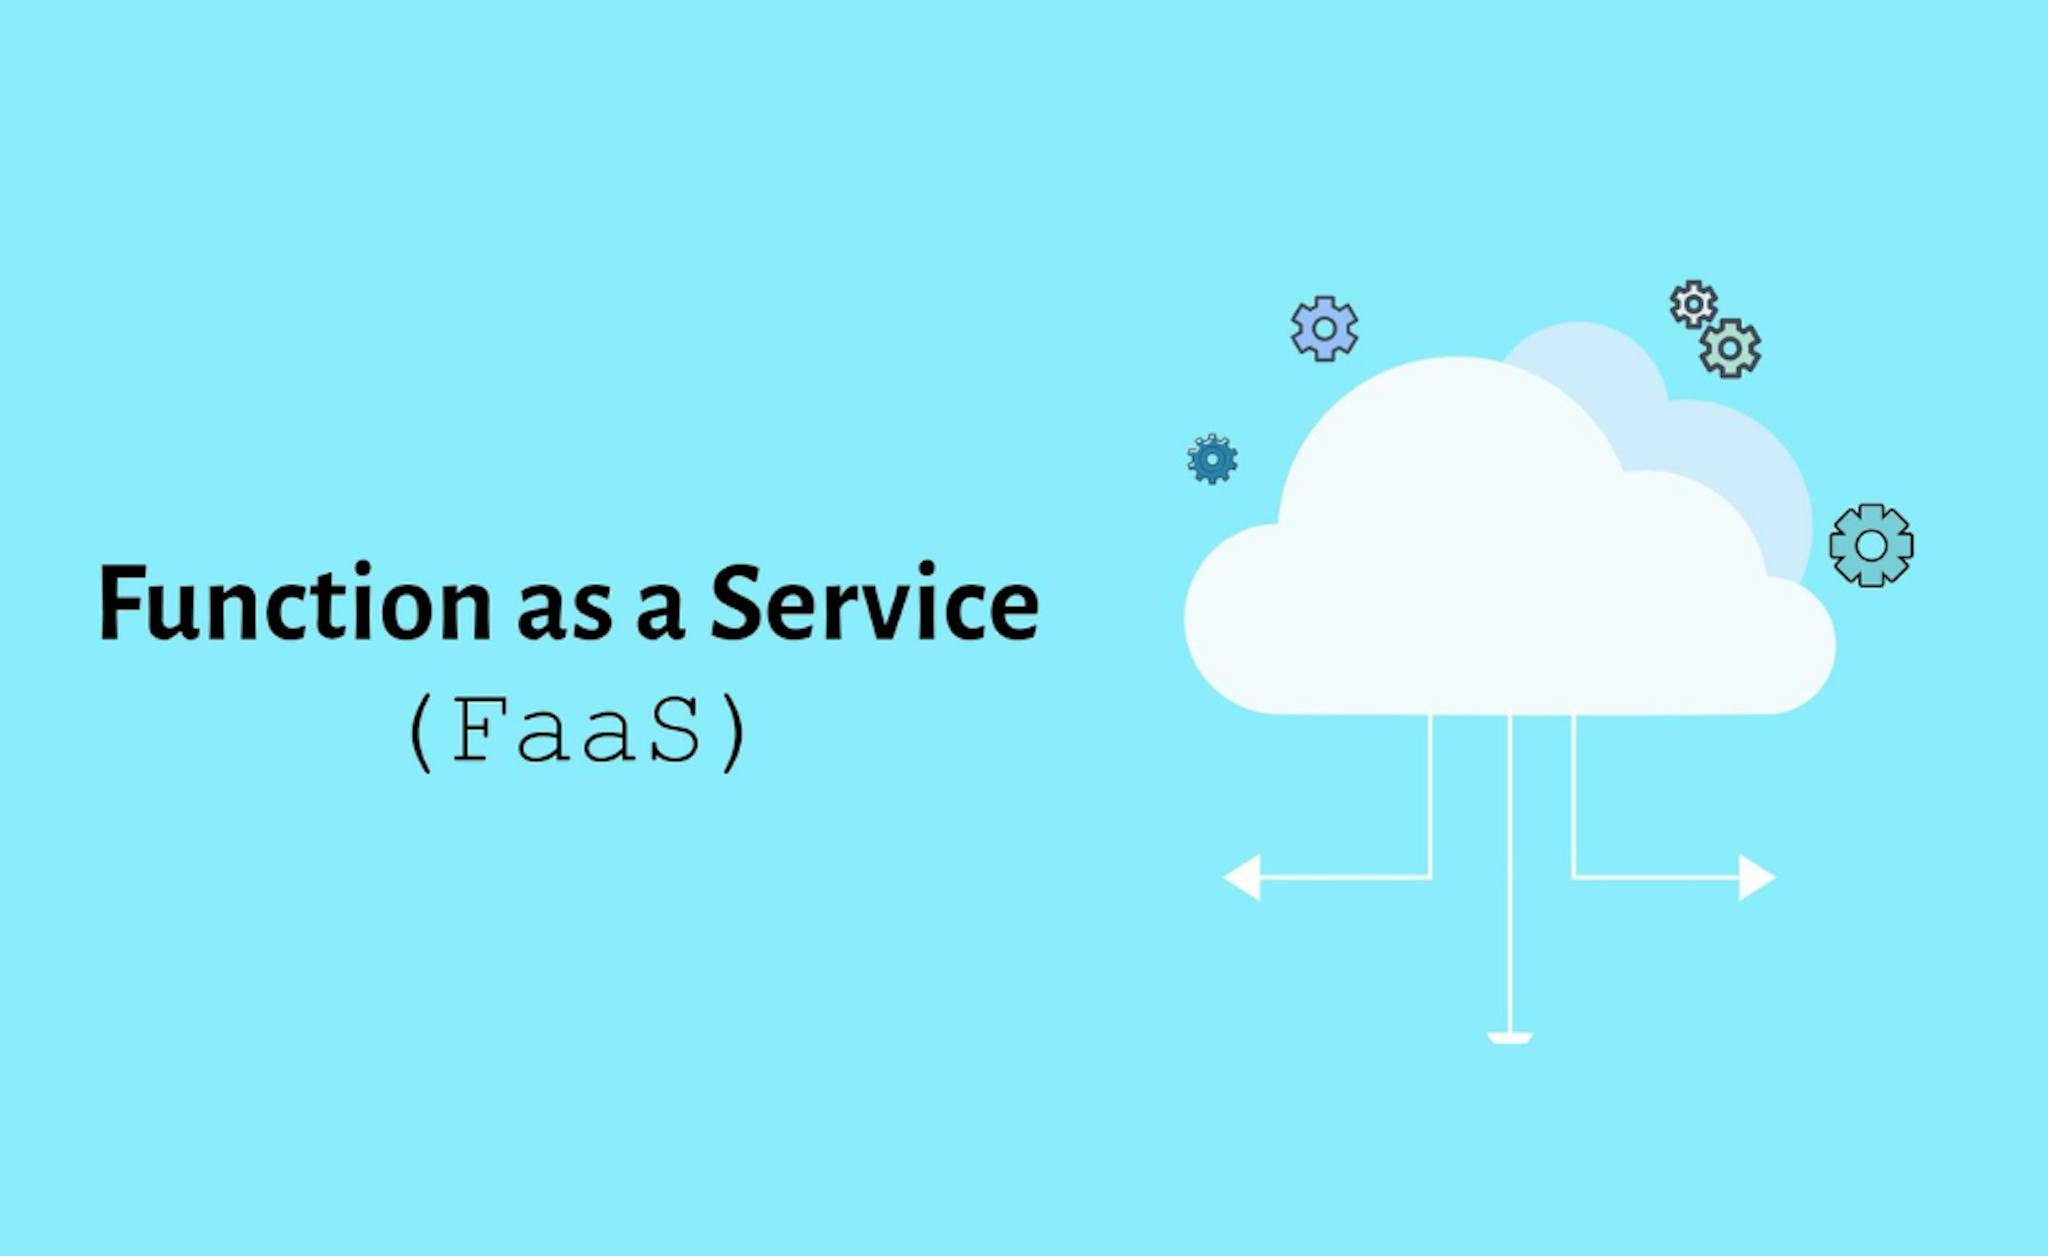 cloud computing solutions in 2021-function as a service-patternbots